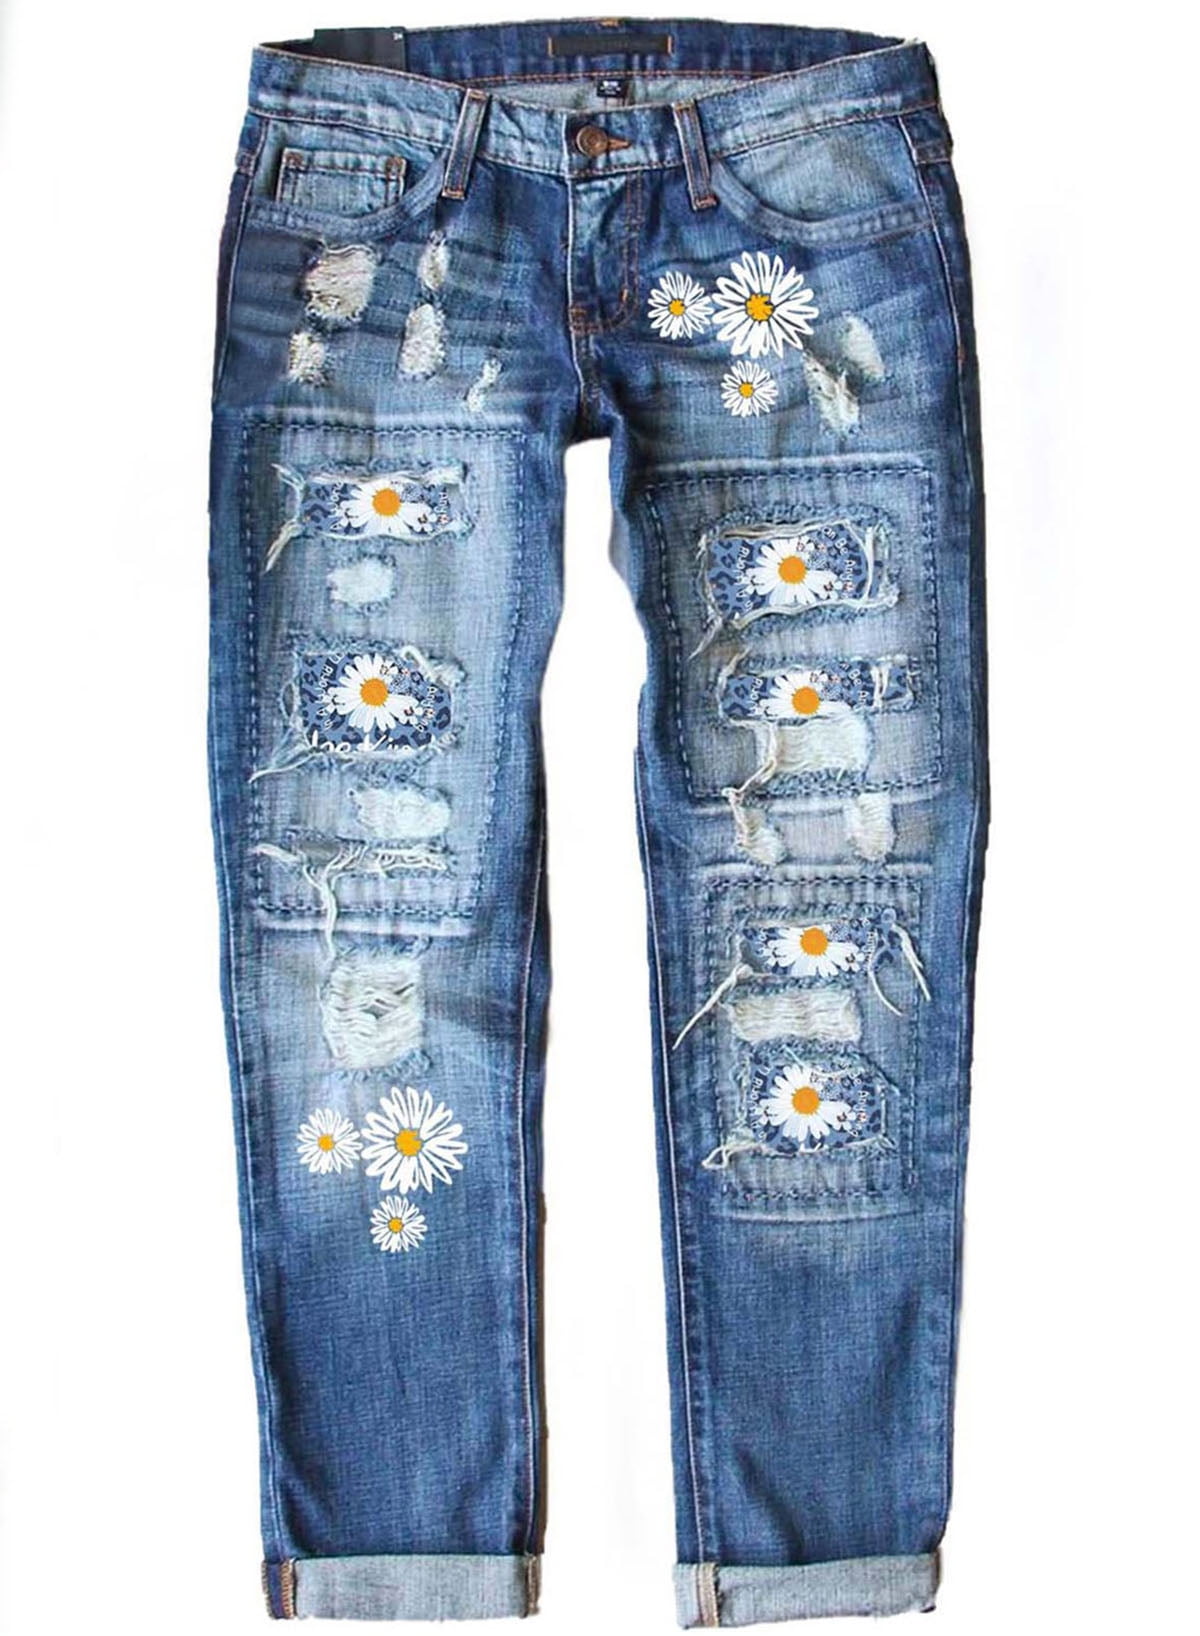 Dokotoo Jeans for Women Plus Size Daisy Printed Ripped Jeans Flower ...